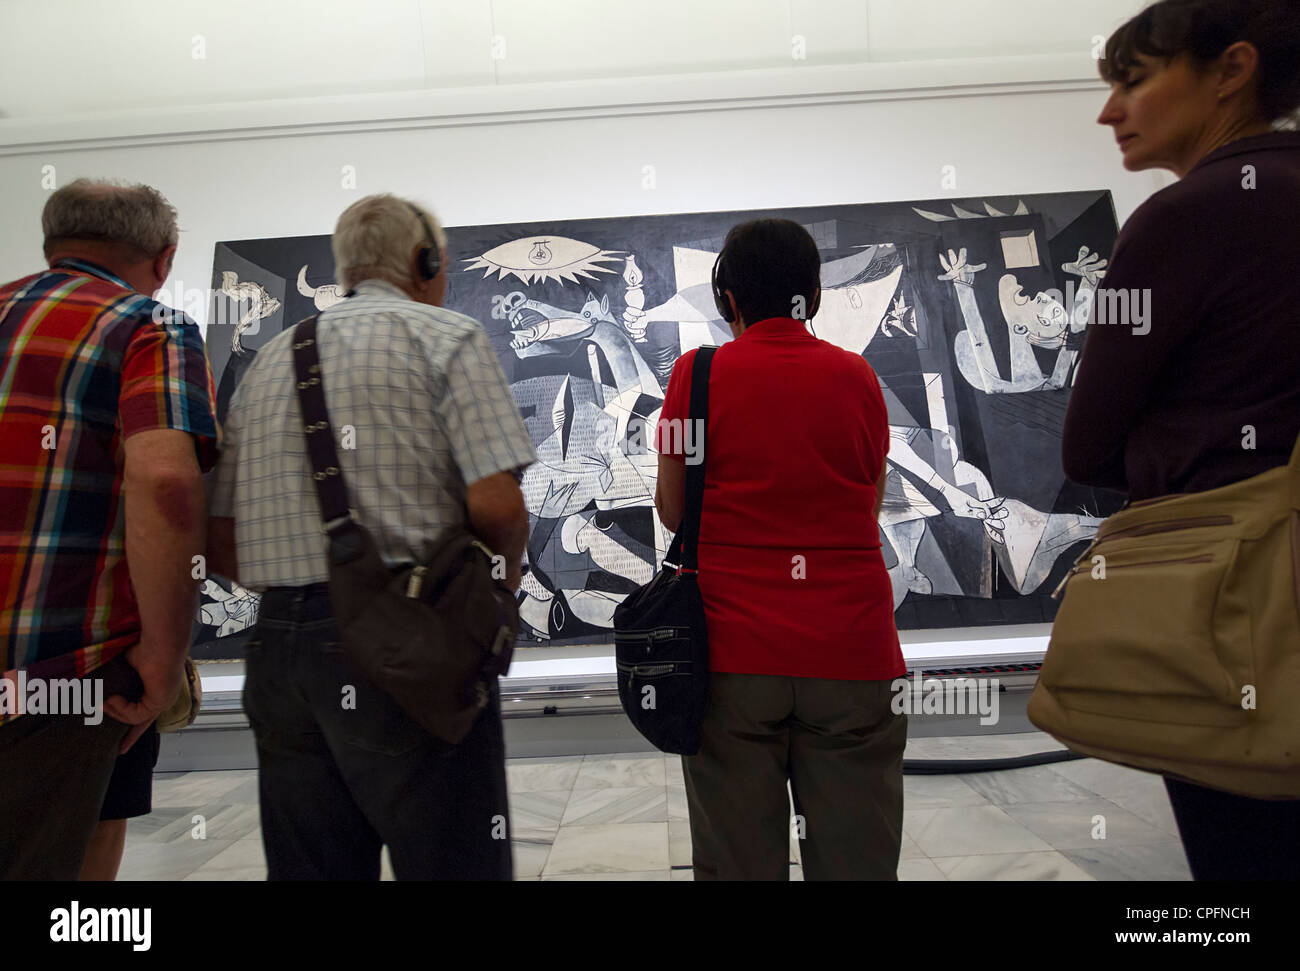 Visitors admiring the 'Guernica' painting by Pablo Picasso at the Reina Sofia modern art museum in Madrid, Spain Stock Photo